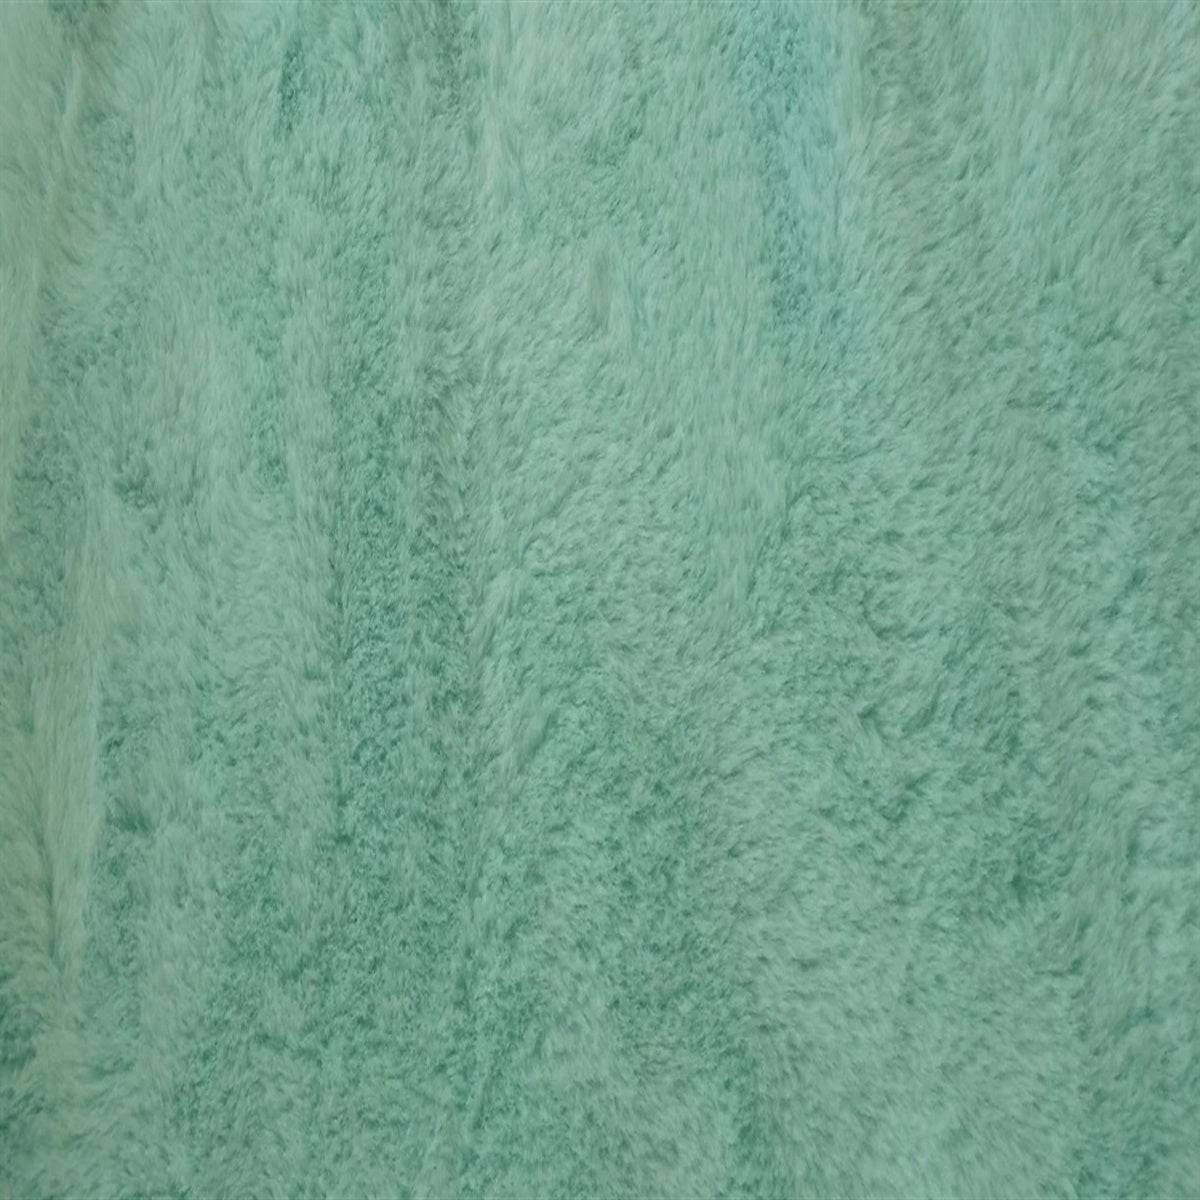 Bunny Thick Minky Fabric By The Roll (20 Yards)ICE FABRICSICE FABRICSAquaBy The Yard (60 inches Wide)Bunny Thick Minky Fabric By The Roll (20 Yards) ICE FABRICS Aqua